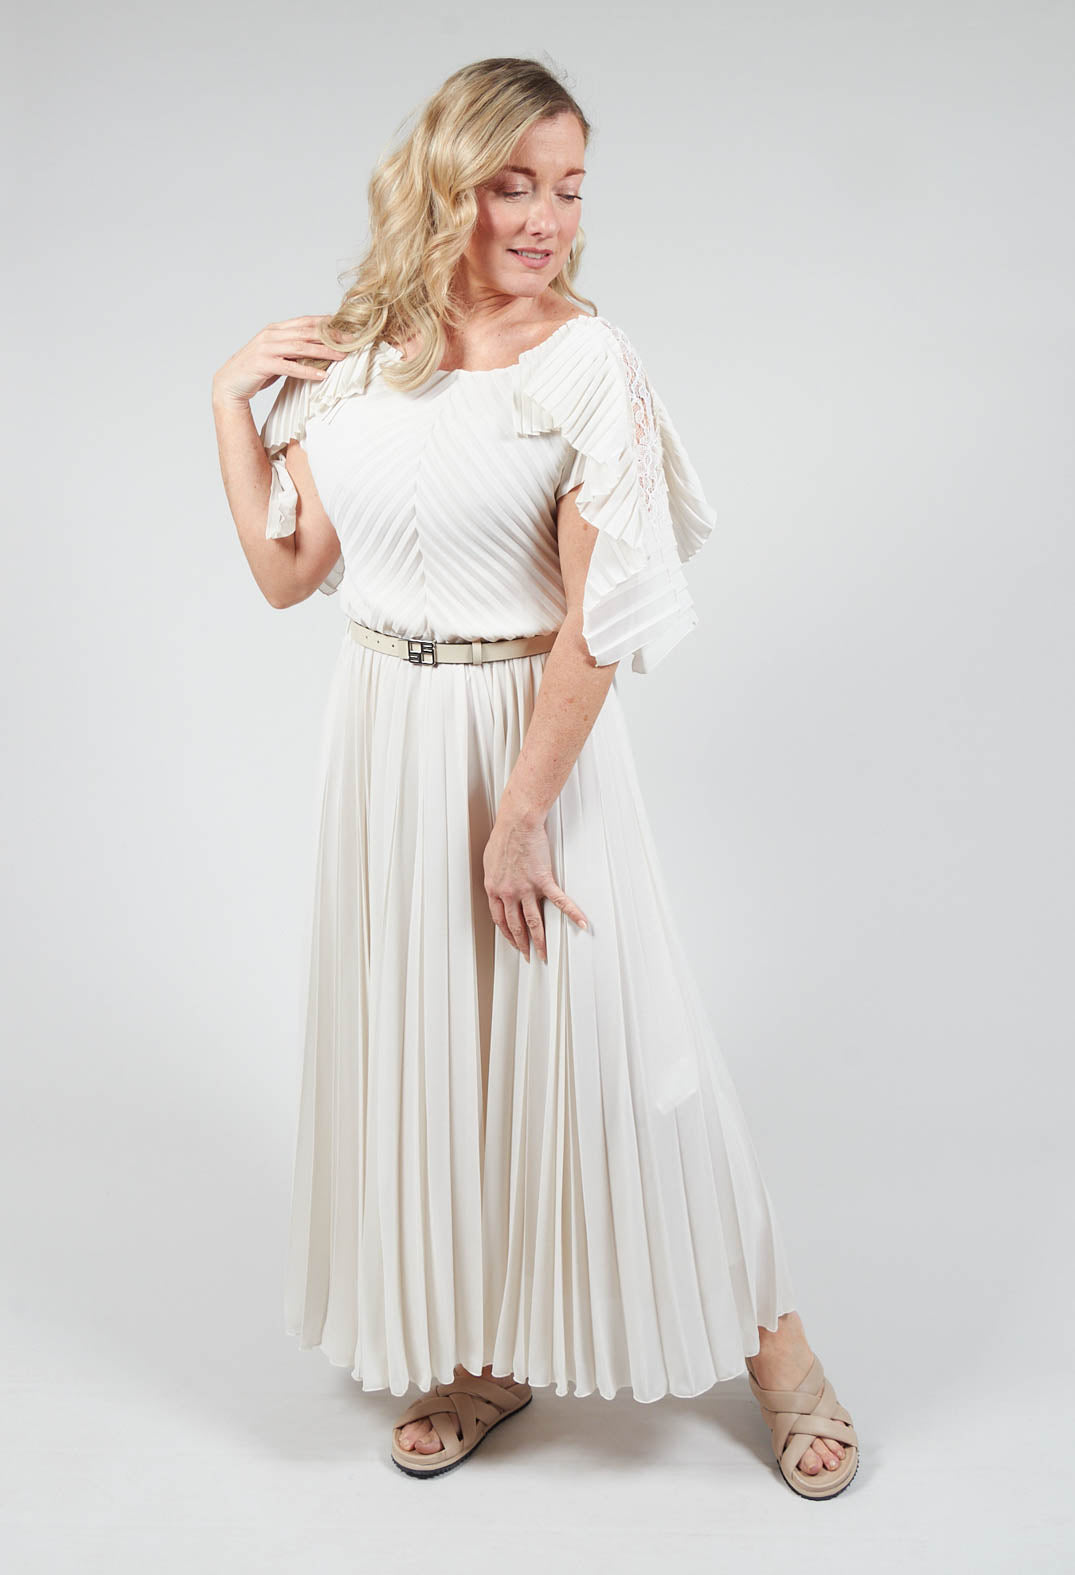 lady wearing neutral colour maxi dress with a waist belt and light colour sandals